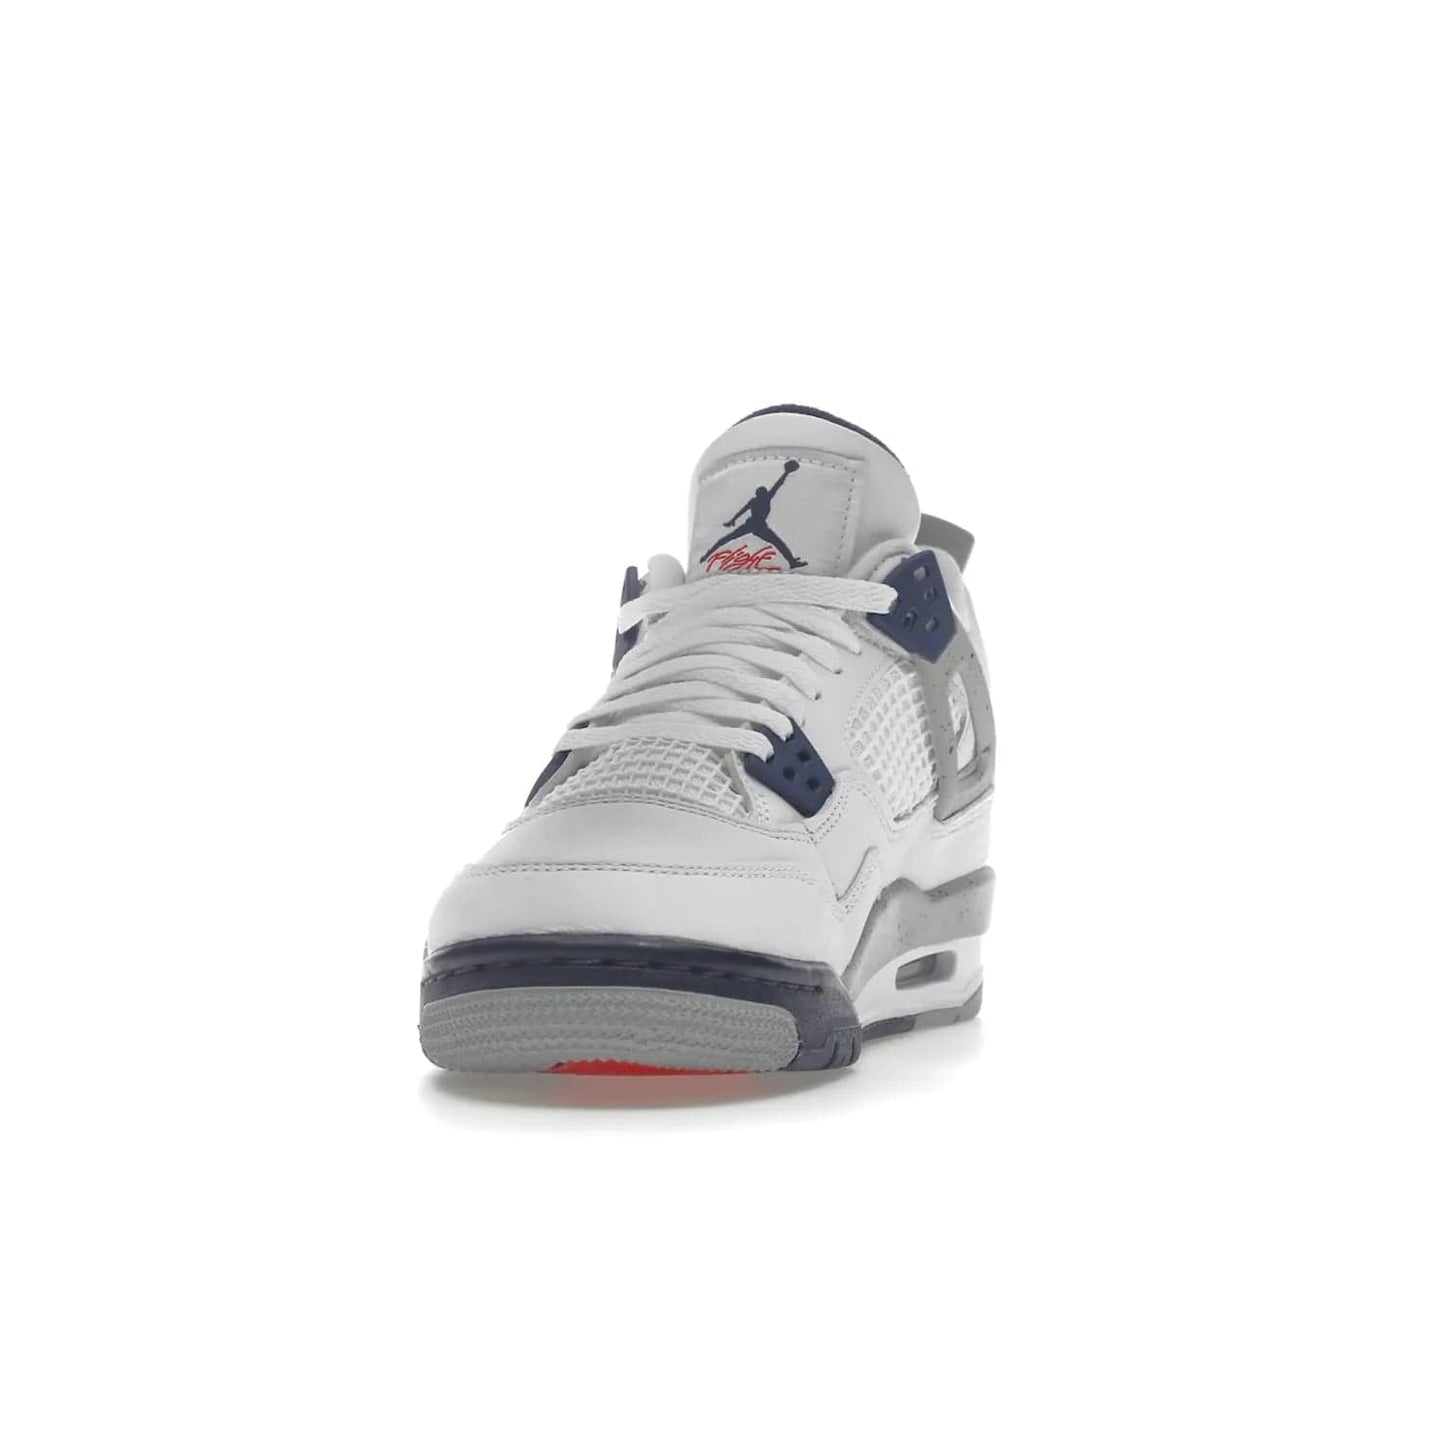 Jordan 4 Retro Midnight Navy (GS) - Image 12 - Only at www.BallersClubKickz.com - Shop the Air Jordan 4 Retro Midnight Navy GS. The white leather upper features black support wings & heel tab, navy eyelets & woven tongue tag with Jumpman logos. The midsole features two-tone polyurethane insole & AIR units in the heel & forefoot. Get the white/midnight navy/light smoke grey/fire colorway & show off your style.